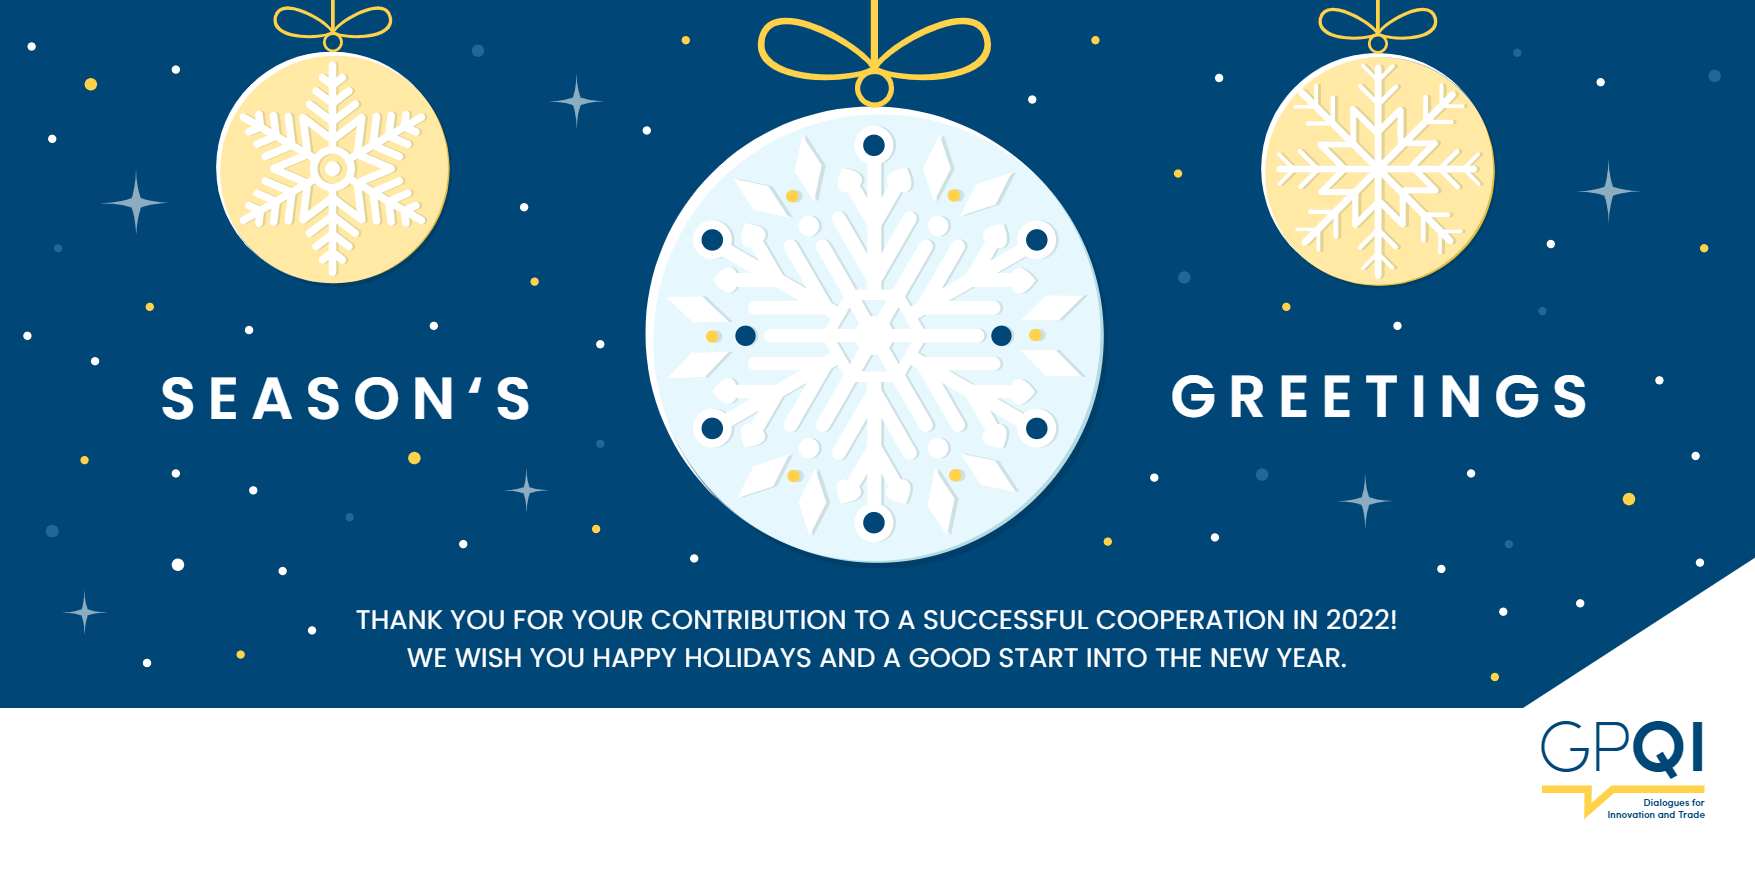 GPQI wishes you happy holidays and a healthy new year. 